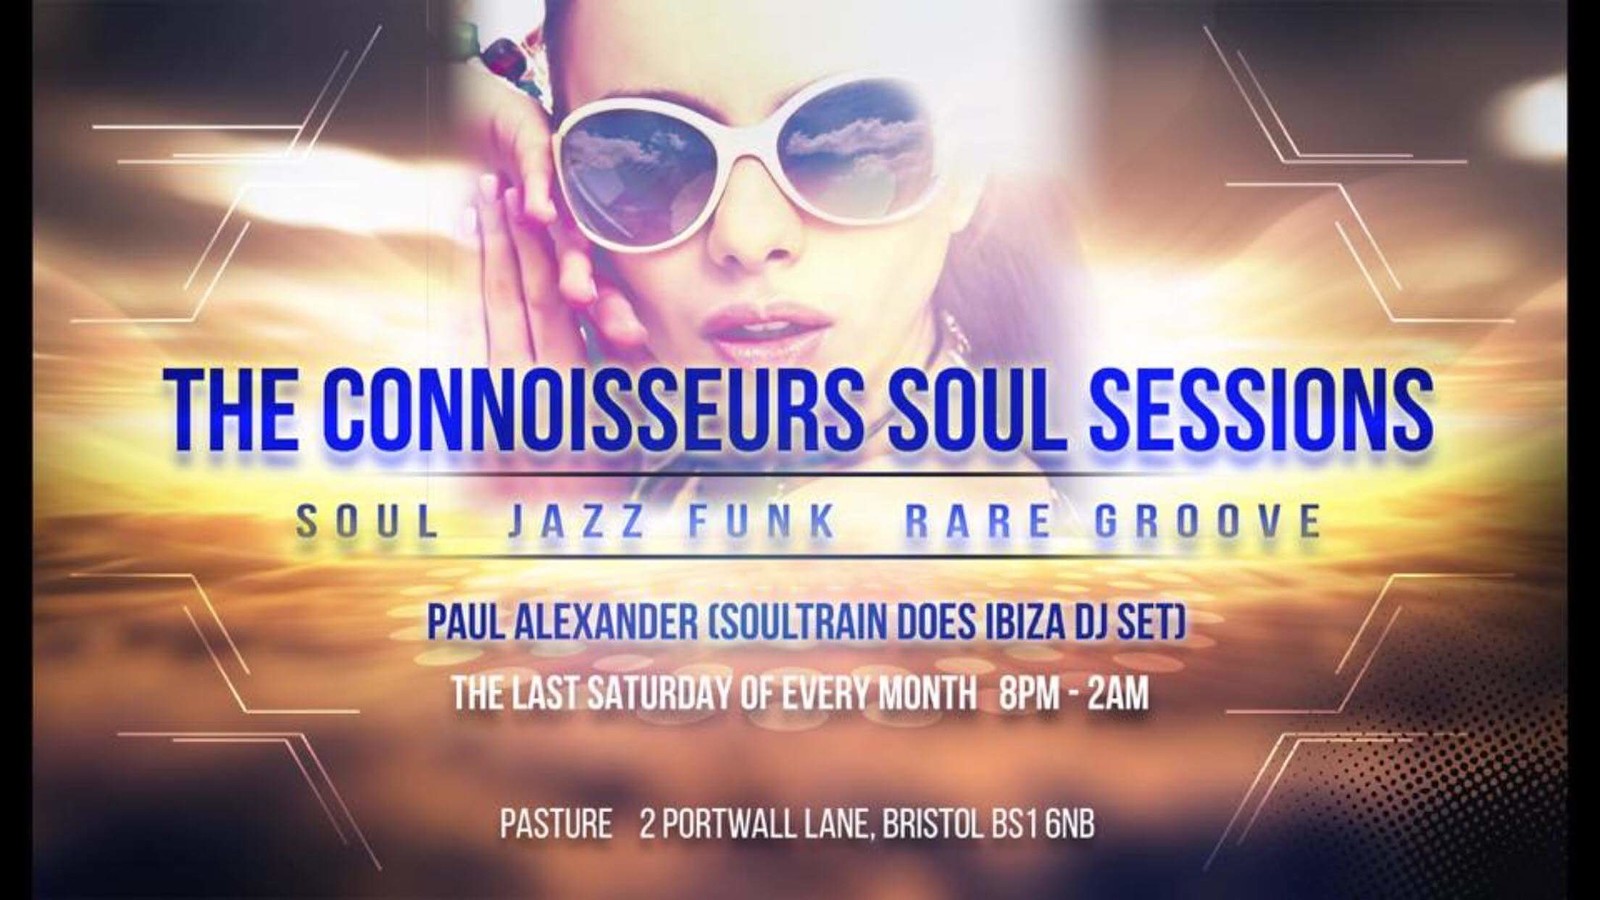 The Connoisseurs Soul Sessions at Pasture